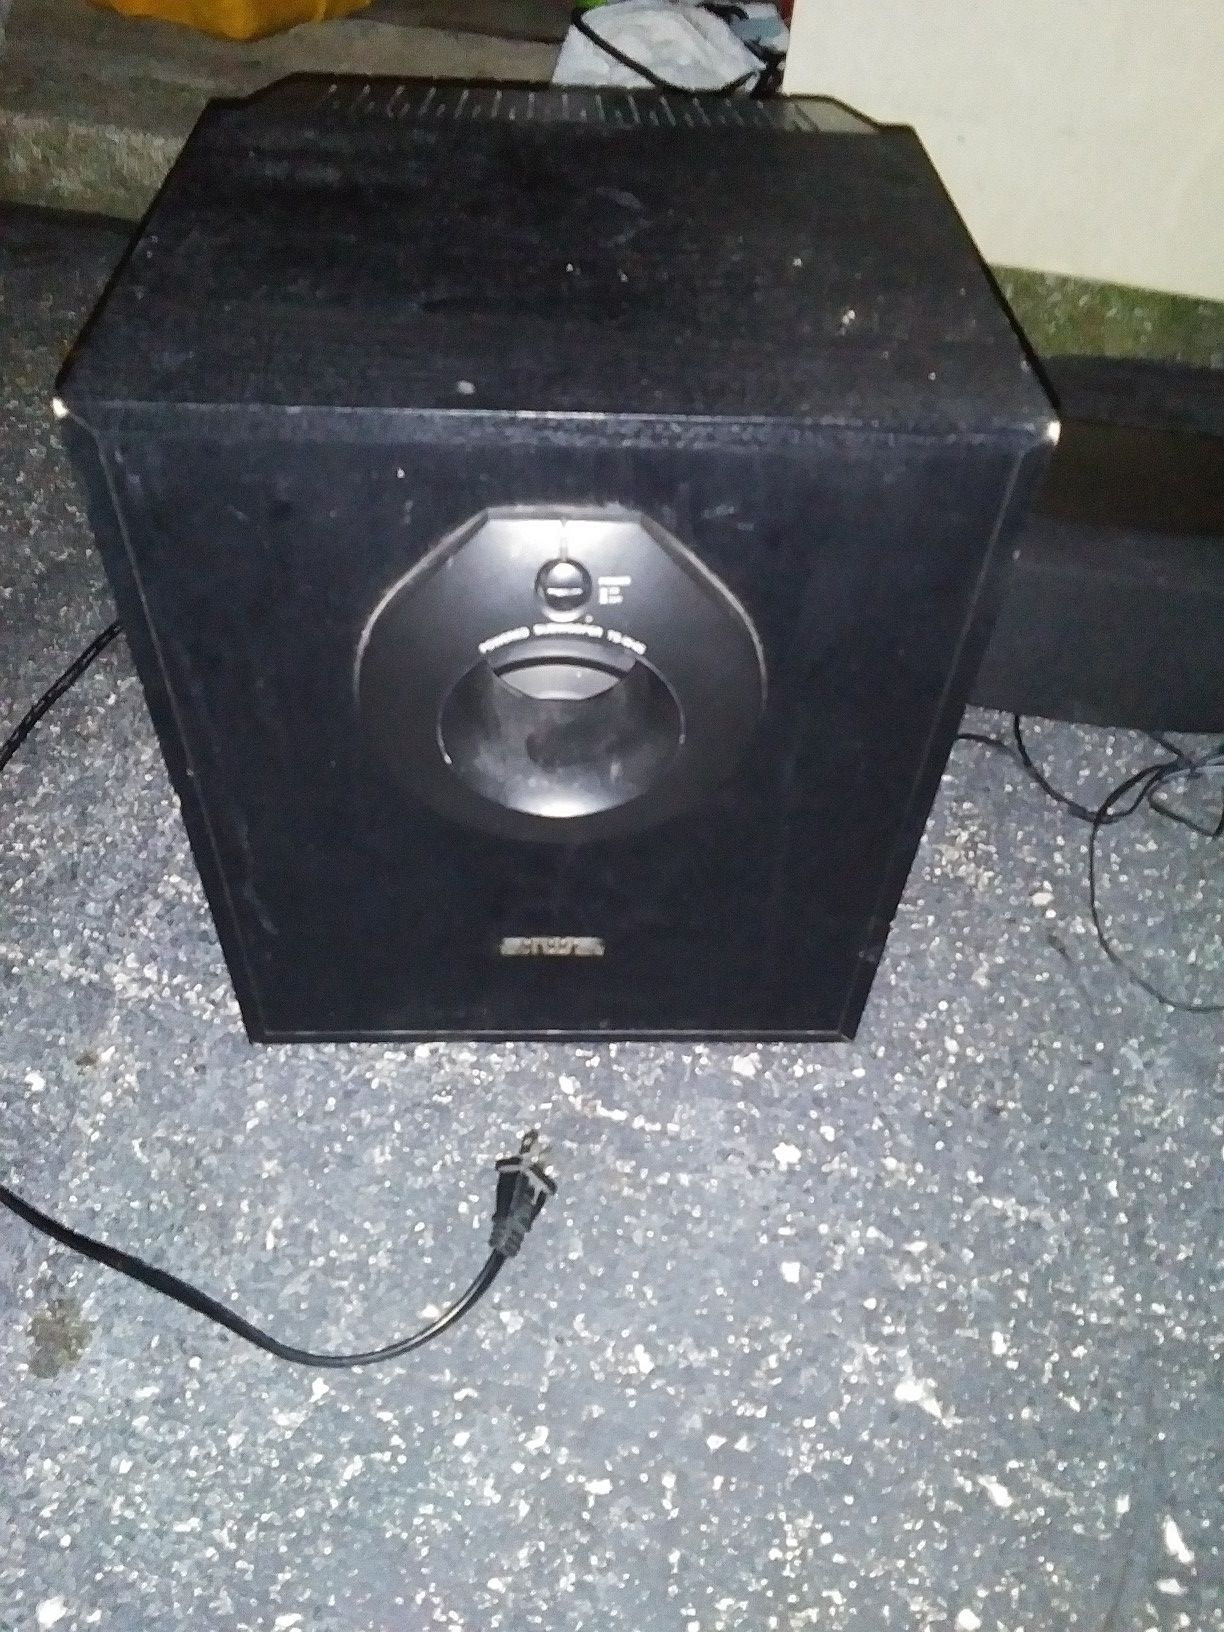 Powered sub with. Sepatate center speaker